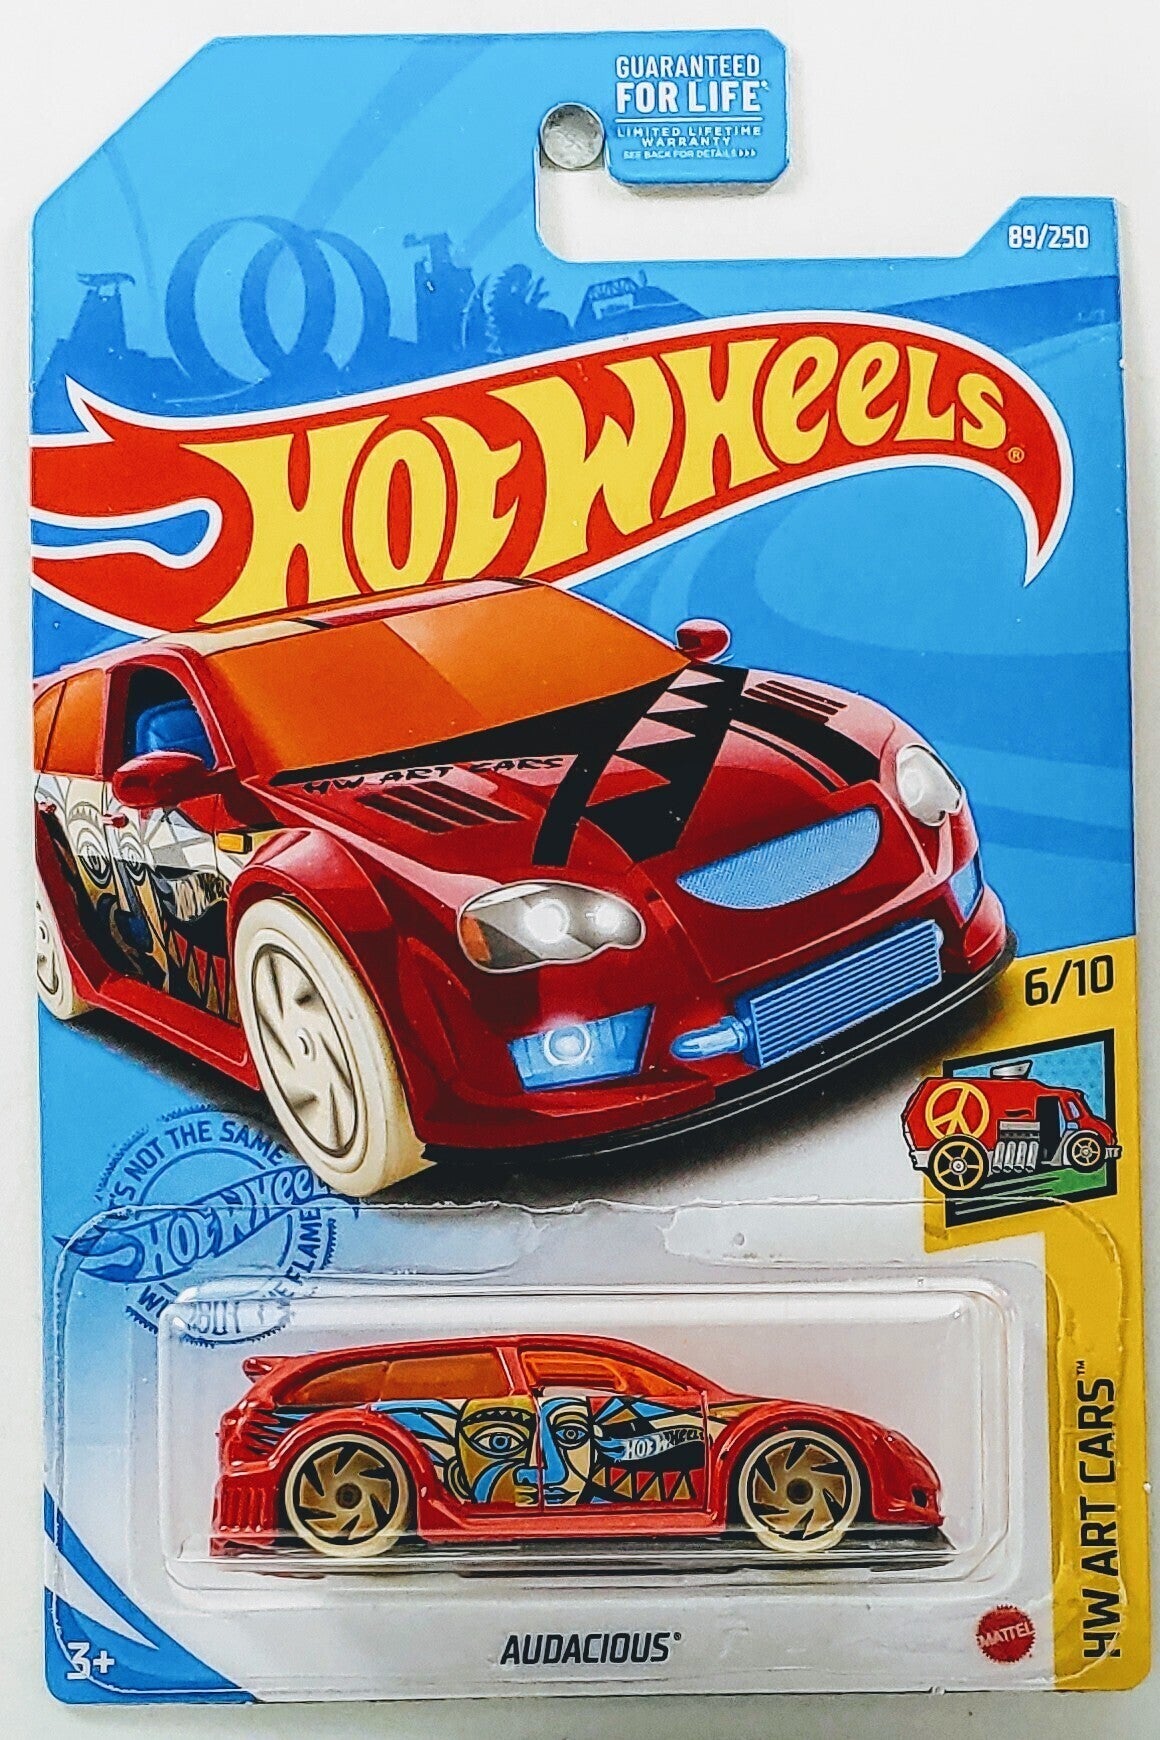 Hot Wheels 2021 - Collector # 089/250 - HW Art Cars 6/10 - Audacious - Red / Letter 'R